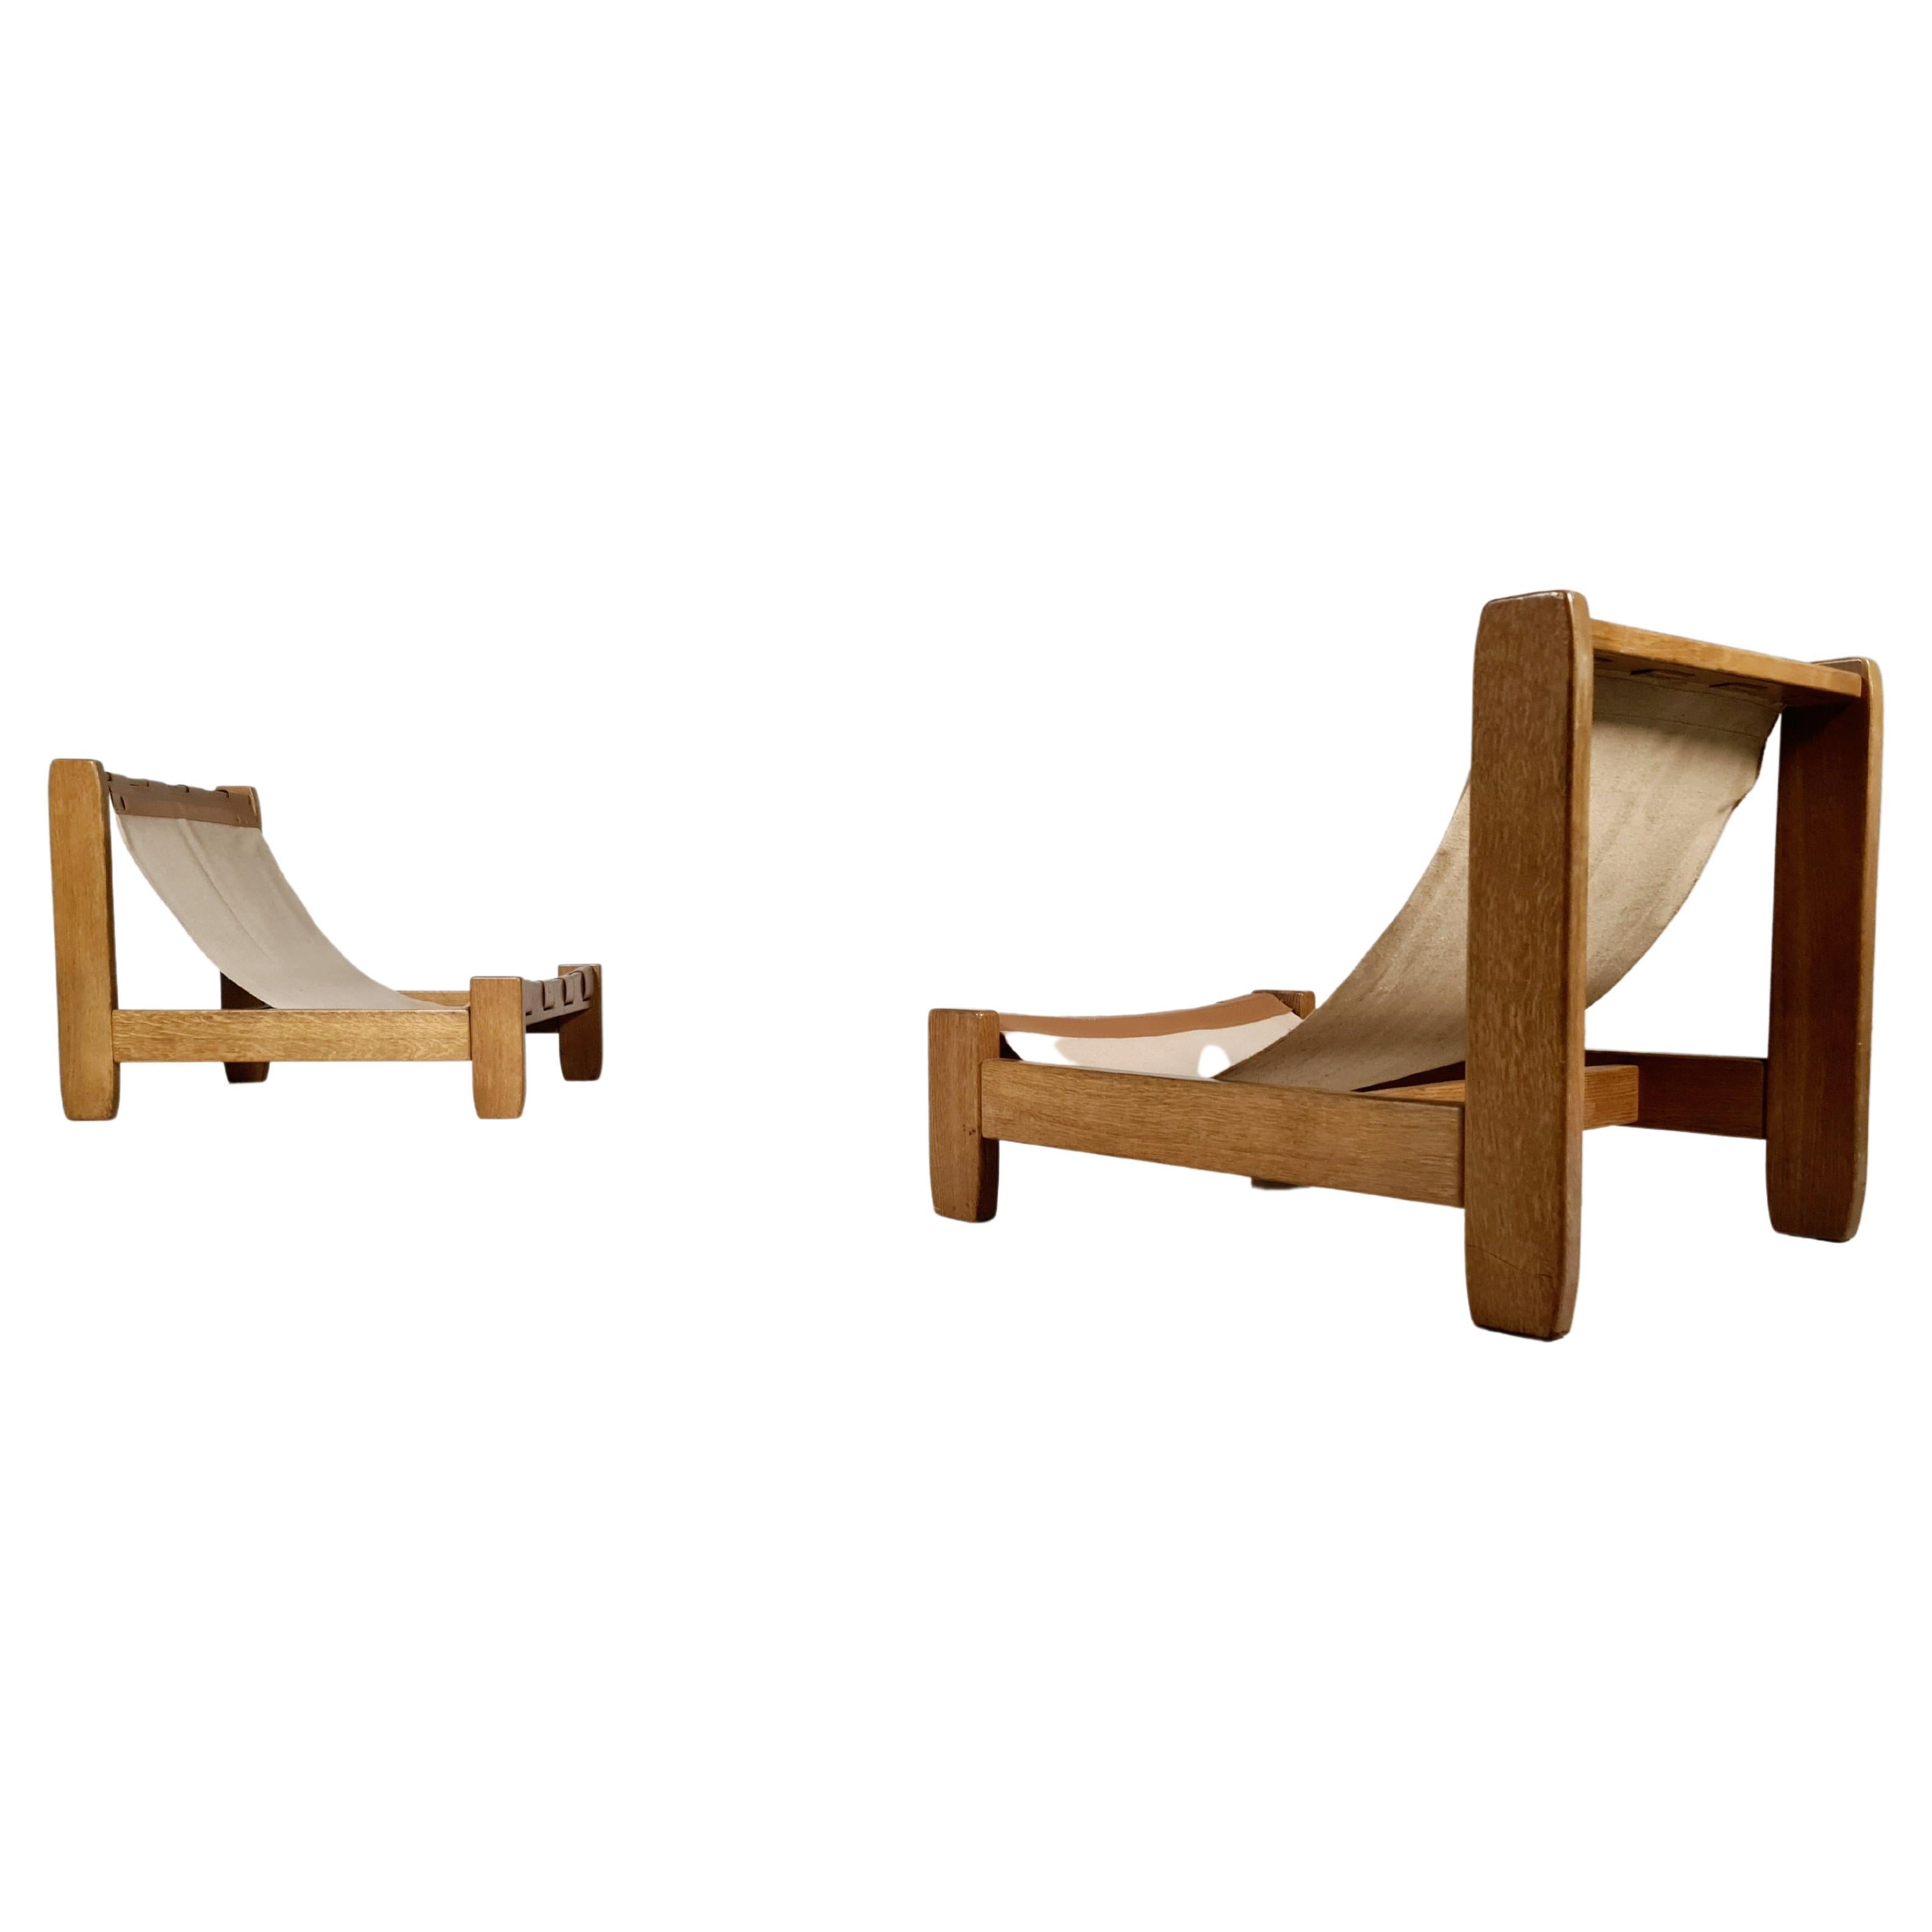 Set of 2 Oak and Canvas Sling Chairs from France, 1970s